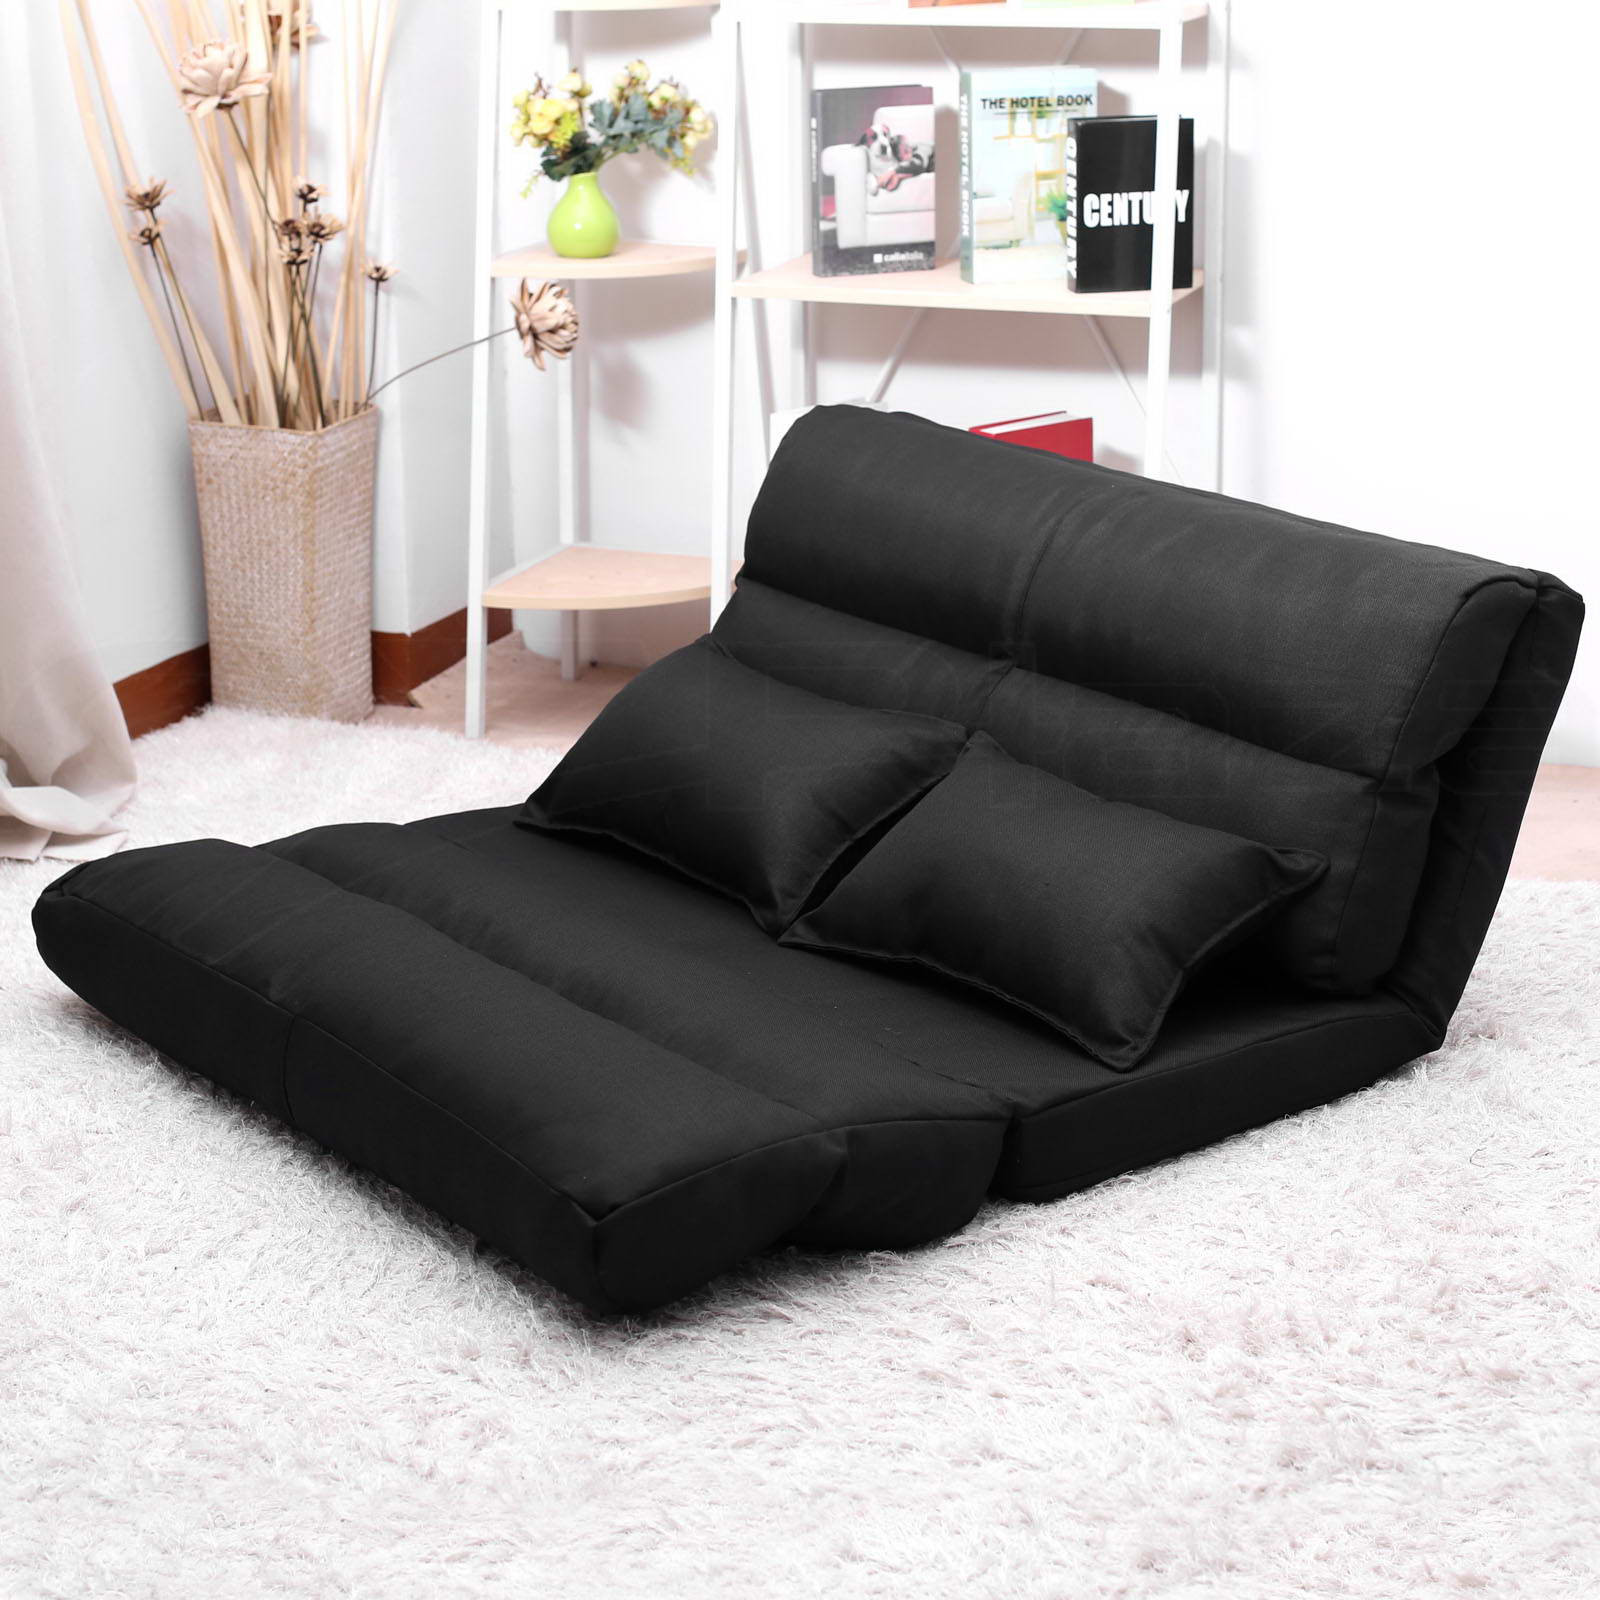 Lounge Sofa
 Lounge Sofa Bed DOUBLE SIZE Floor Recliner Folding Chaise